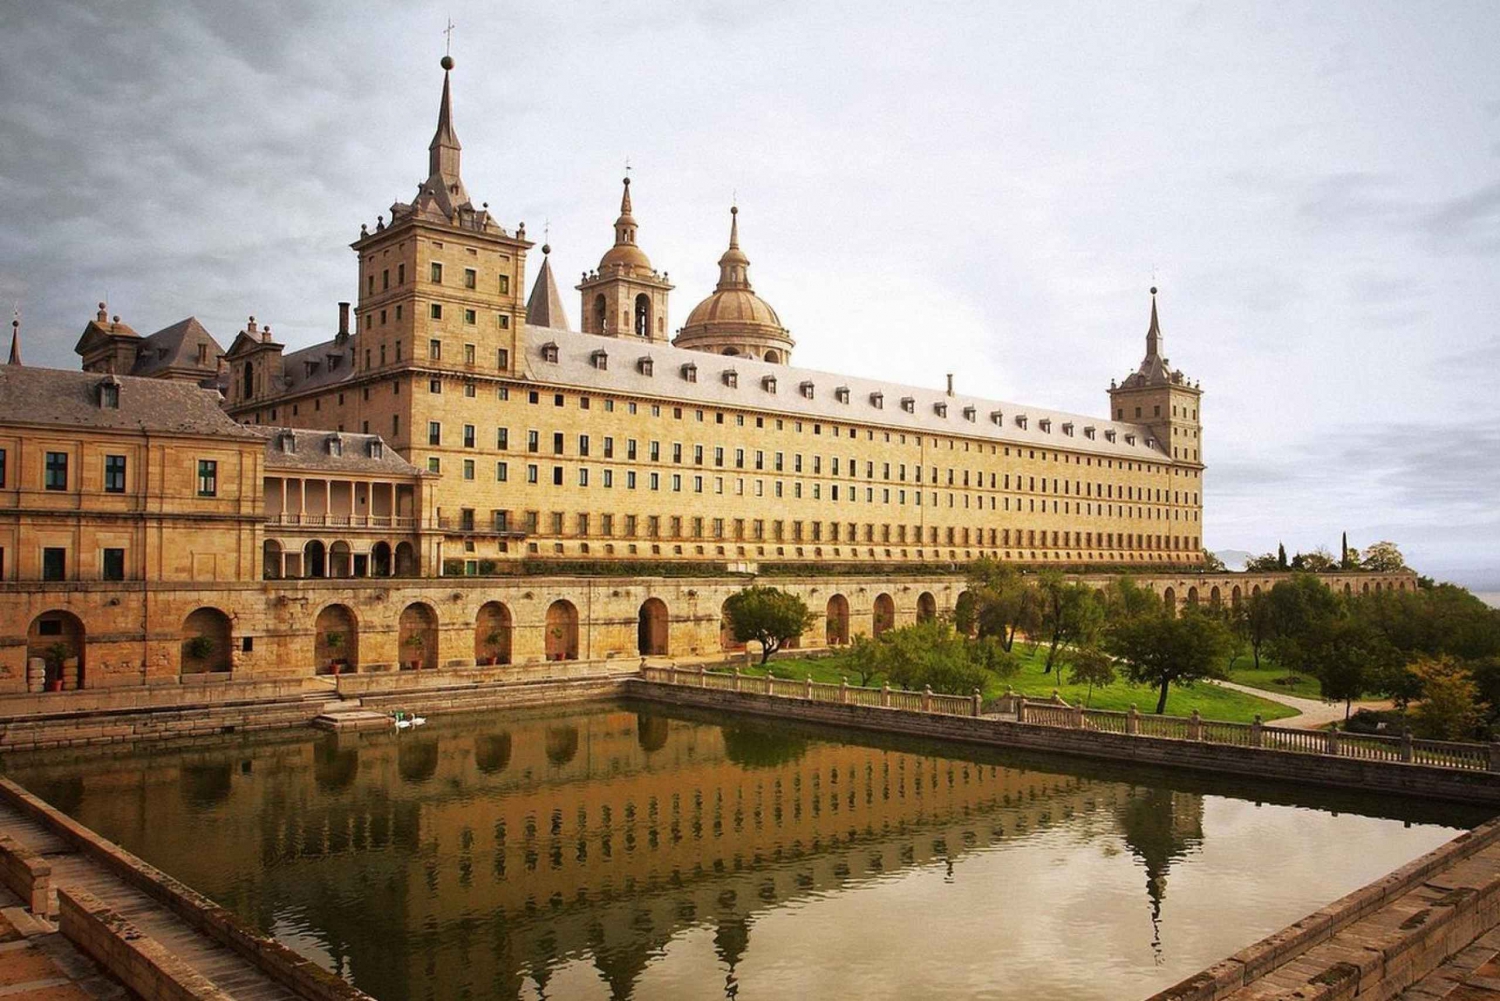 From Madrid: El Escorial, Valley of the Fallen, & City Tour